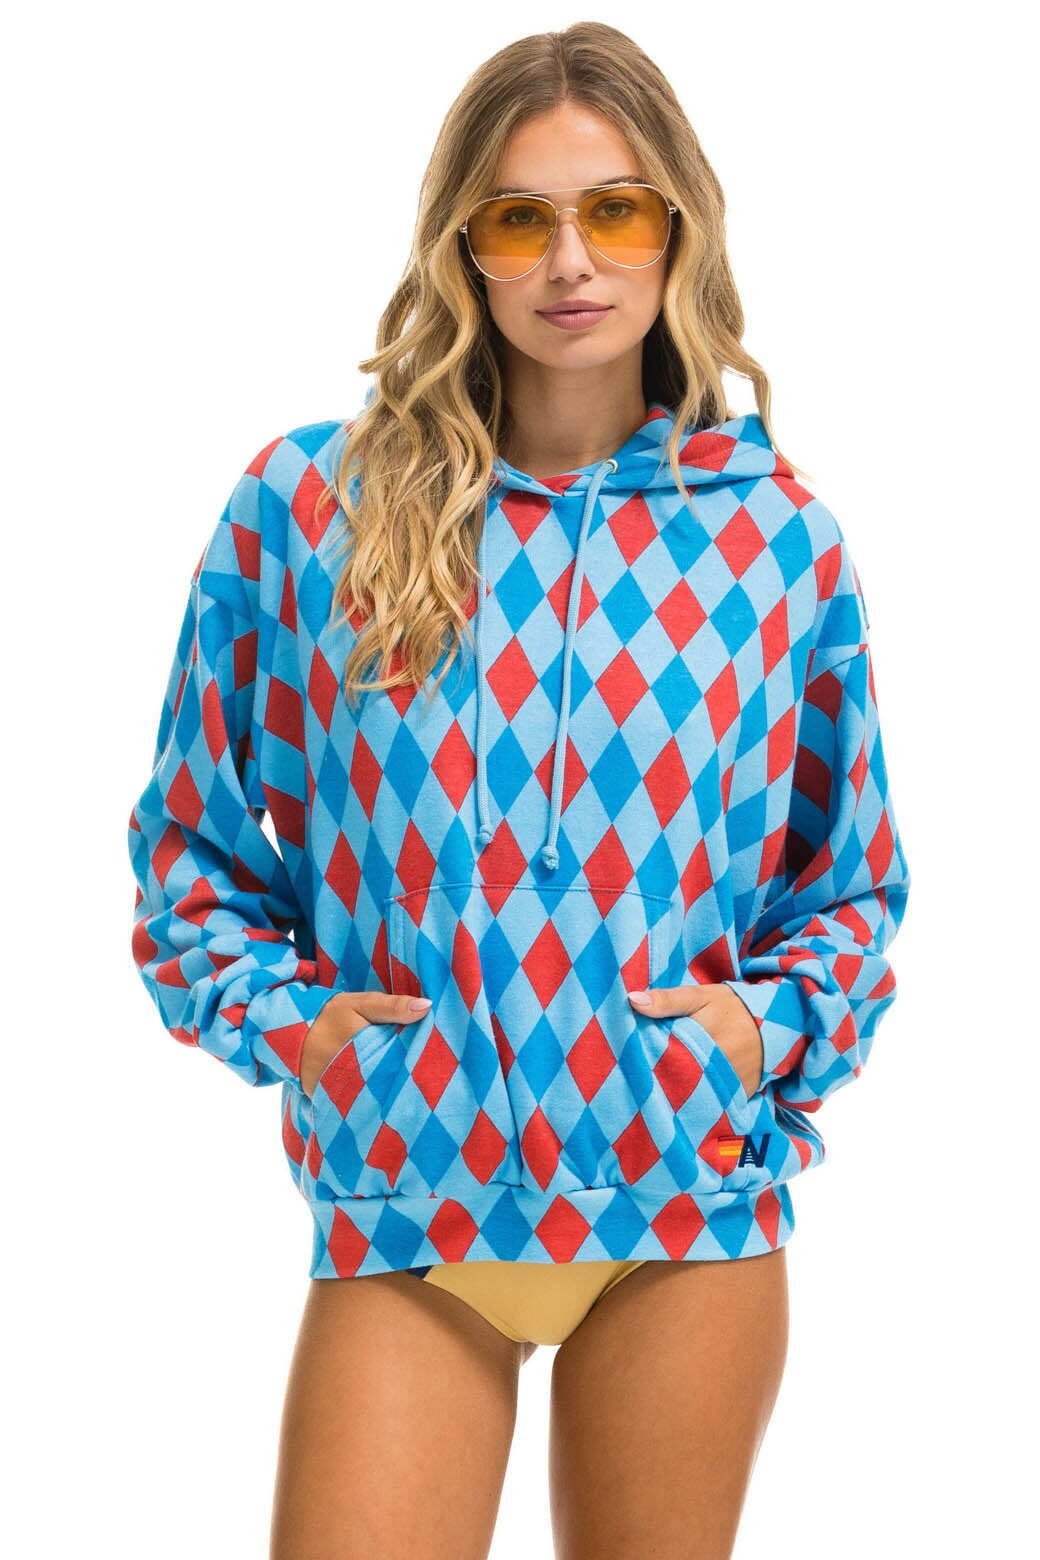 DIAMOND REPEAT SMILEY RELAXED PULLOVER HOODIE - SKY Hoodie Aviator Nation 